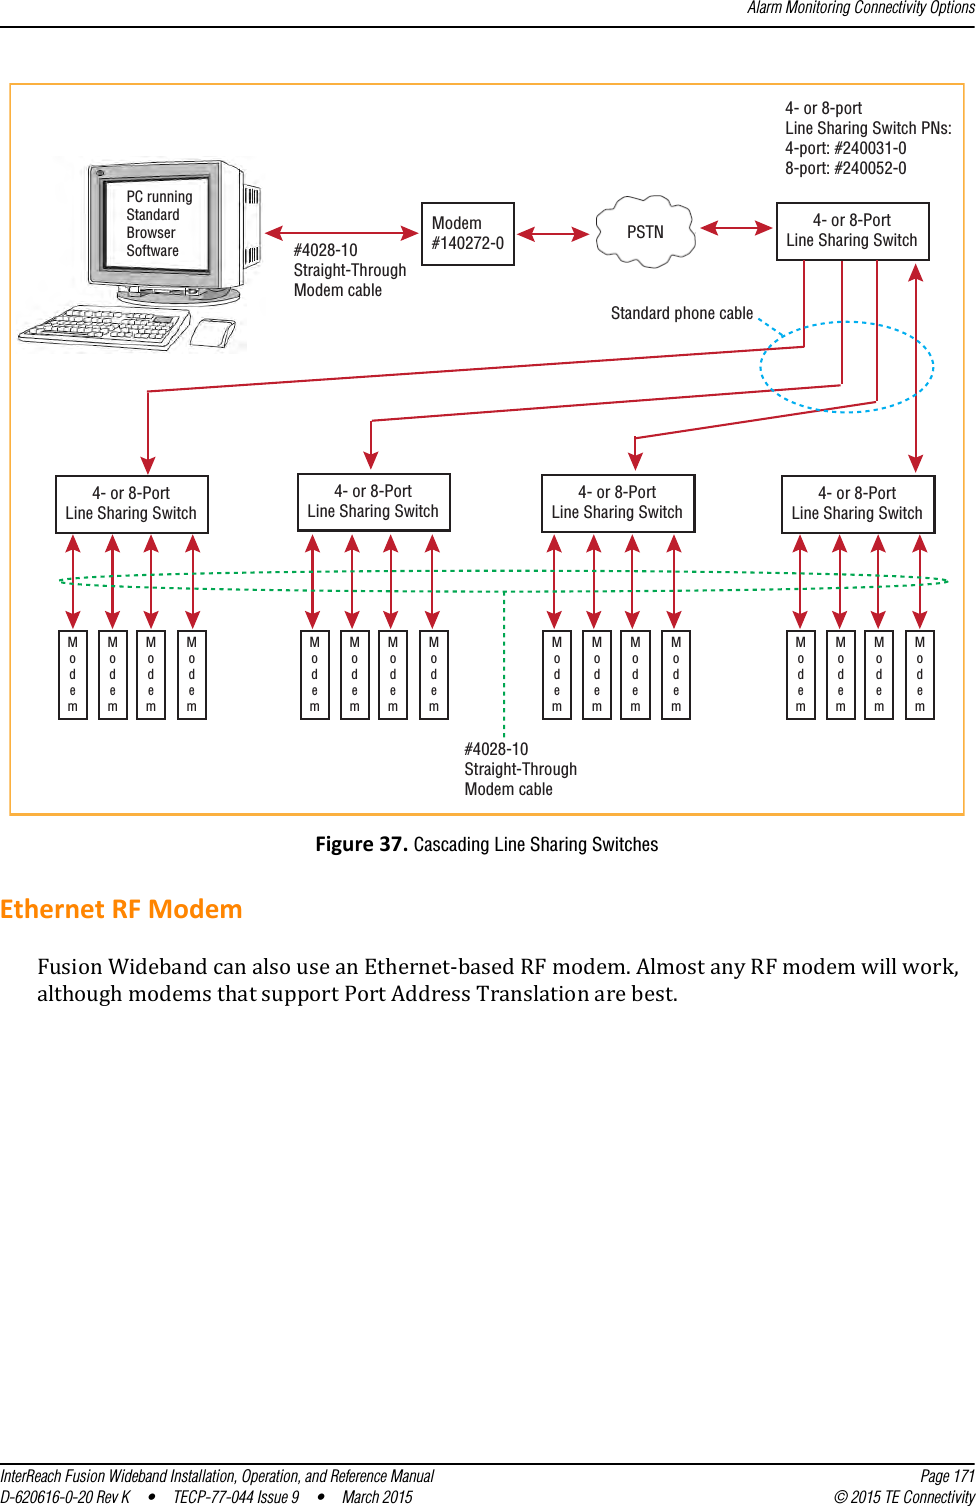 Alarm Monitoring Connectivity OptionsInterReach Fusion Wideband Installation, Operation, and Reference Manual Page 171D-620616-0-20 Rev K  •  TECP-77-044 Issue 9  •  March 2015 © 2015 TE ConnectivityFigure 37. Cascading Line Sharing SwitchesEthernet RF ModemFusion Wideband can also use an Ethernet-based RF modem. Almost any RF modem will work, although modems that support Port Address Translation are best.#4028-10Straight-ThroughModem cablePC runningStandardBrowserSoftwarePSTNModem#140272-0#4028-10Straight-ThroughModem cable4- or 8-PortLine Sharing Switch4- or 8-portLine Sharing Switch PNs:4-port: #240031-08-port: #240052-0Standard phone cable4- or 8-PortLine Sharing Switch4- or 8-PortLine Sharing Switch4- or 8-PortLine Sharing Switch4- or 8-PortLine Sharing SwitchModemModemModemModemModemModemModemModemModemModemModemModemModemModemModemModem